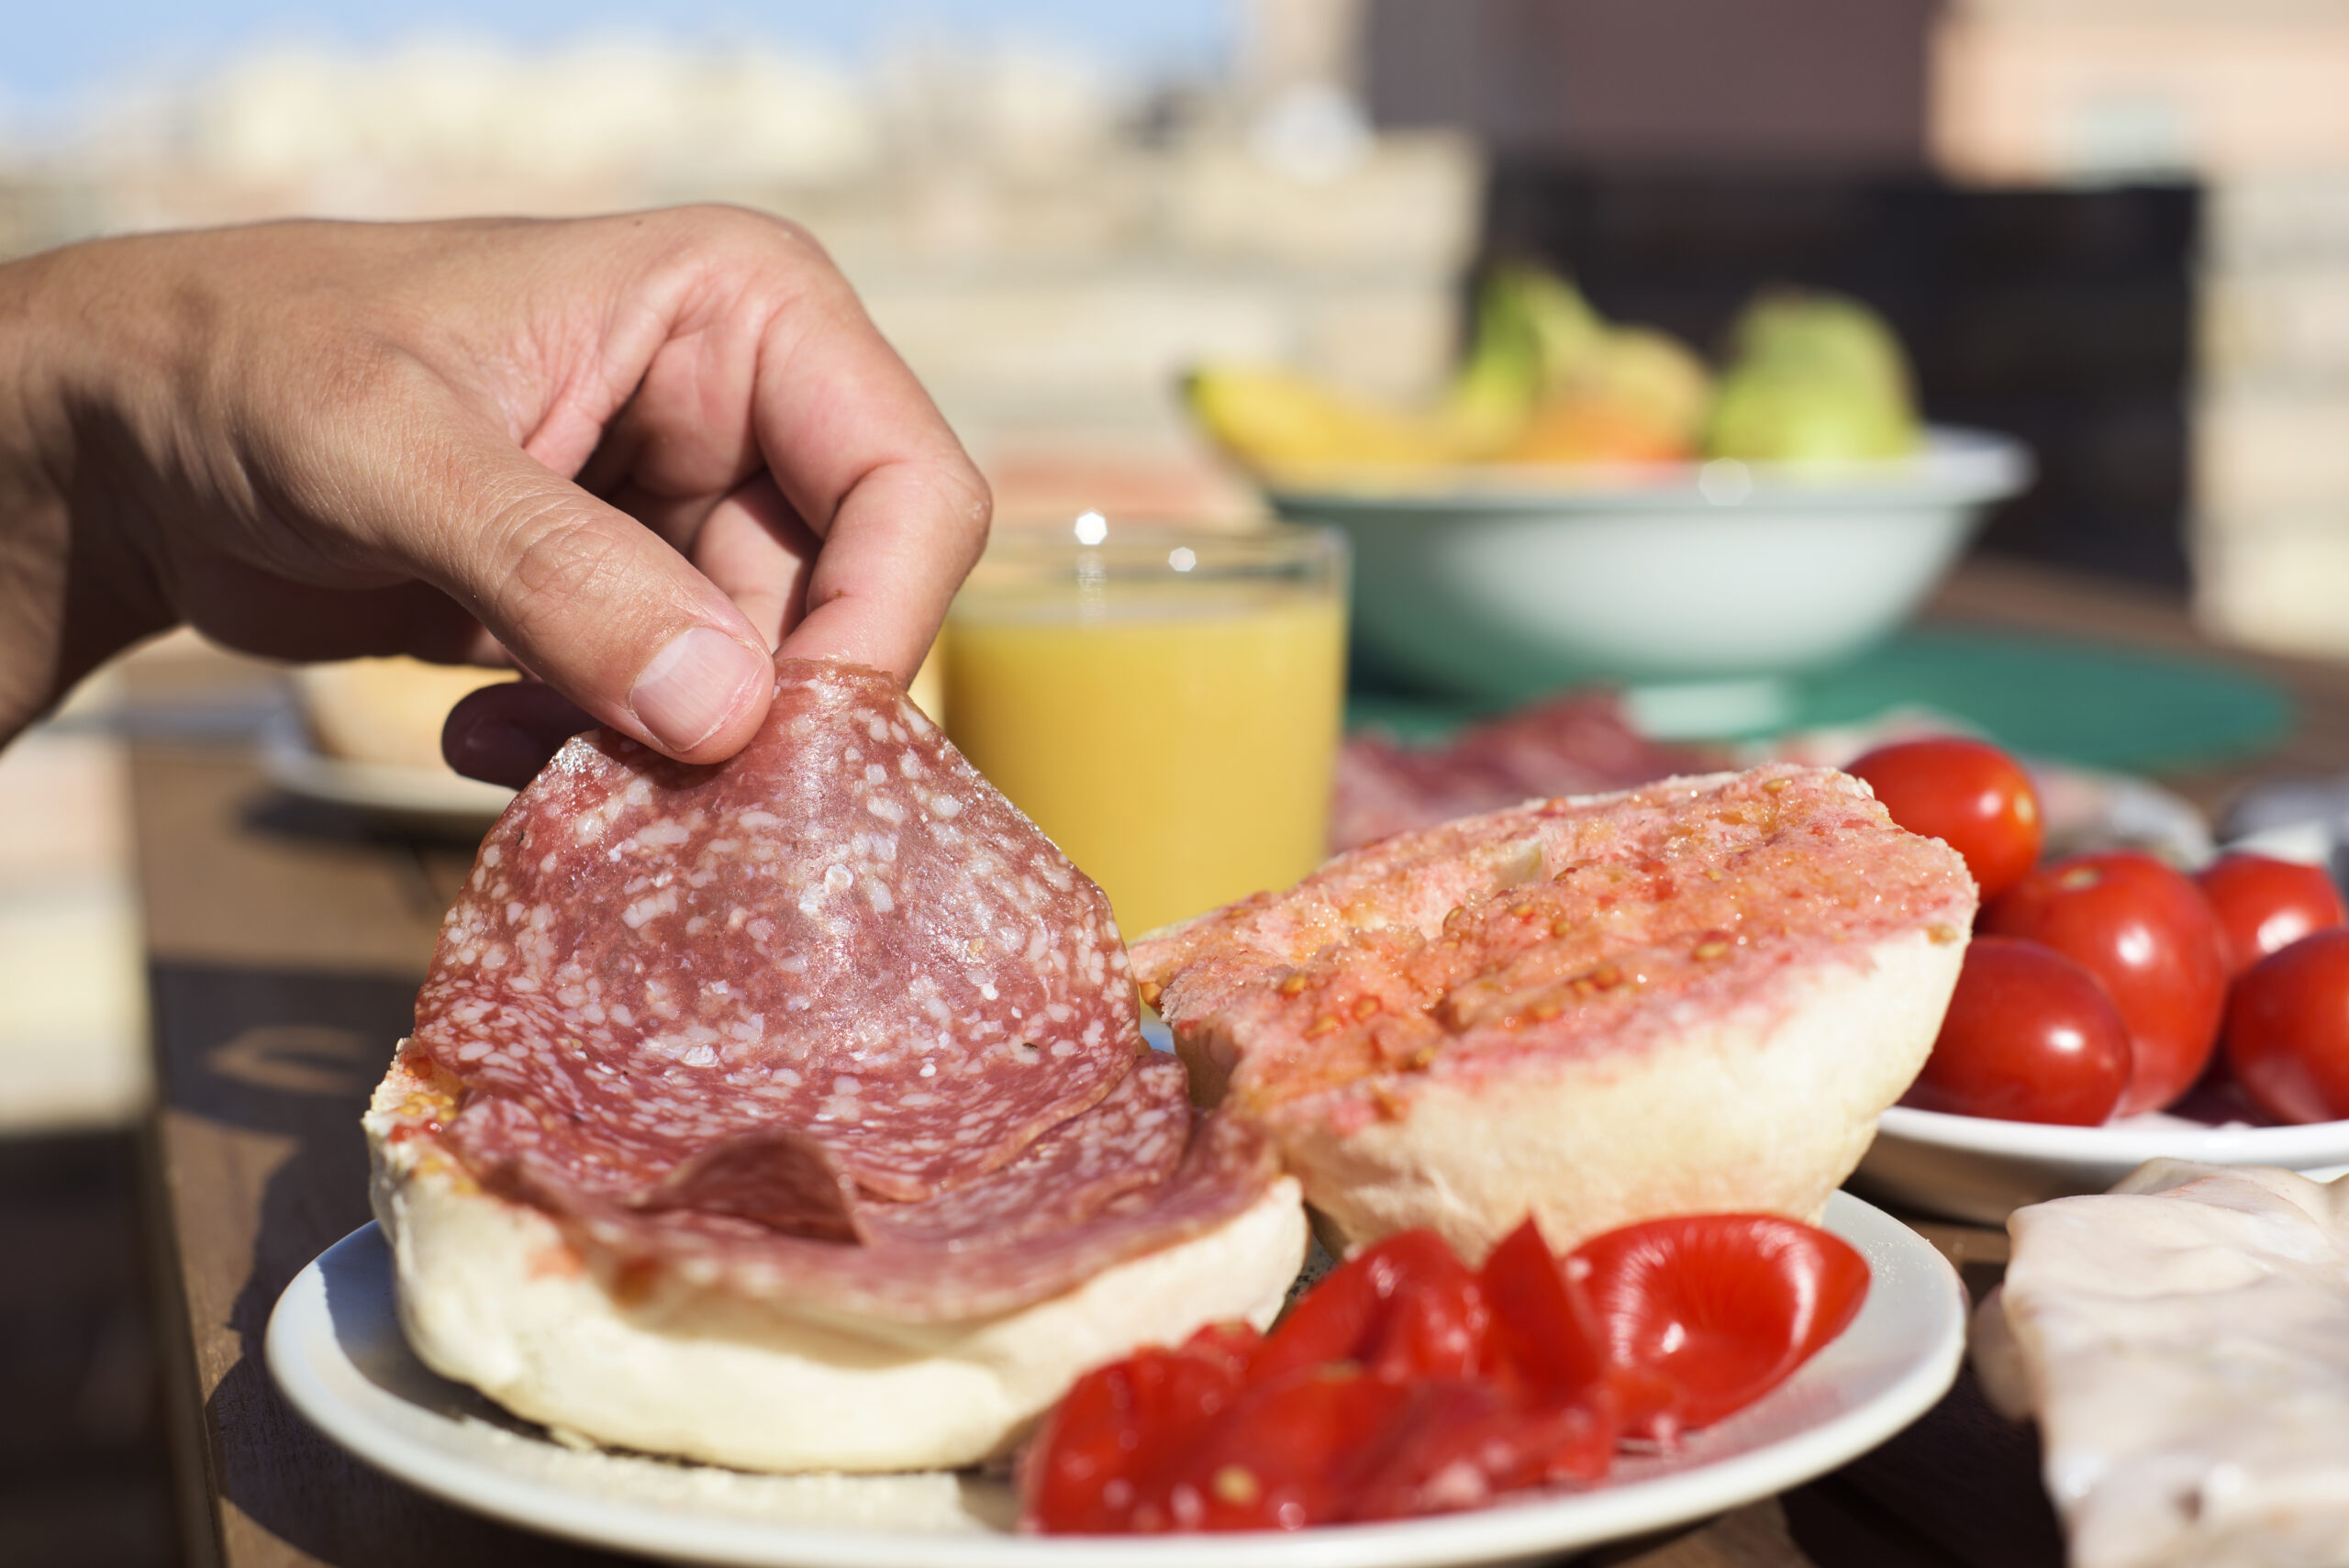 closeup of a man preparing a sandwich in a bun with typical catalan pa amb tomaquet, bread with tomato, stuffed with salami, on a wooden table outdoors